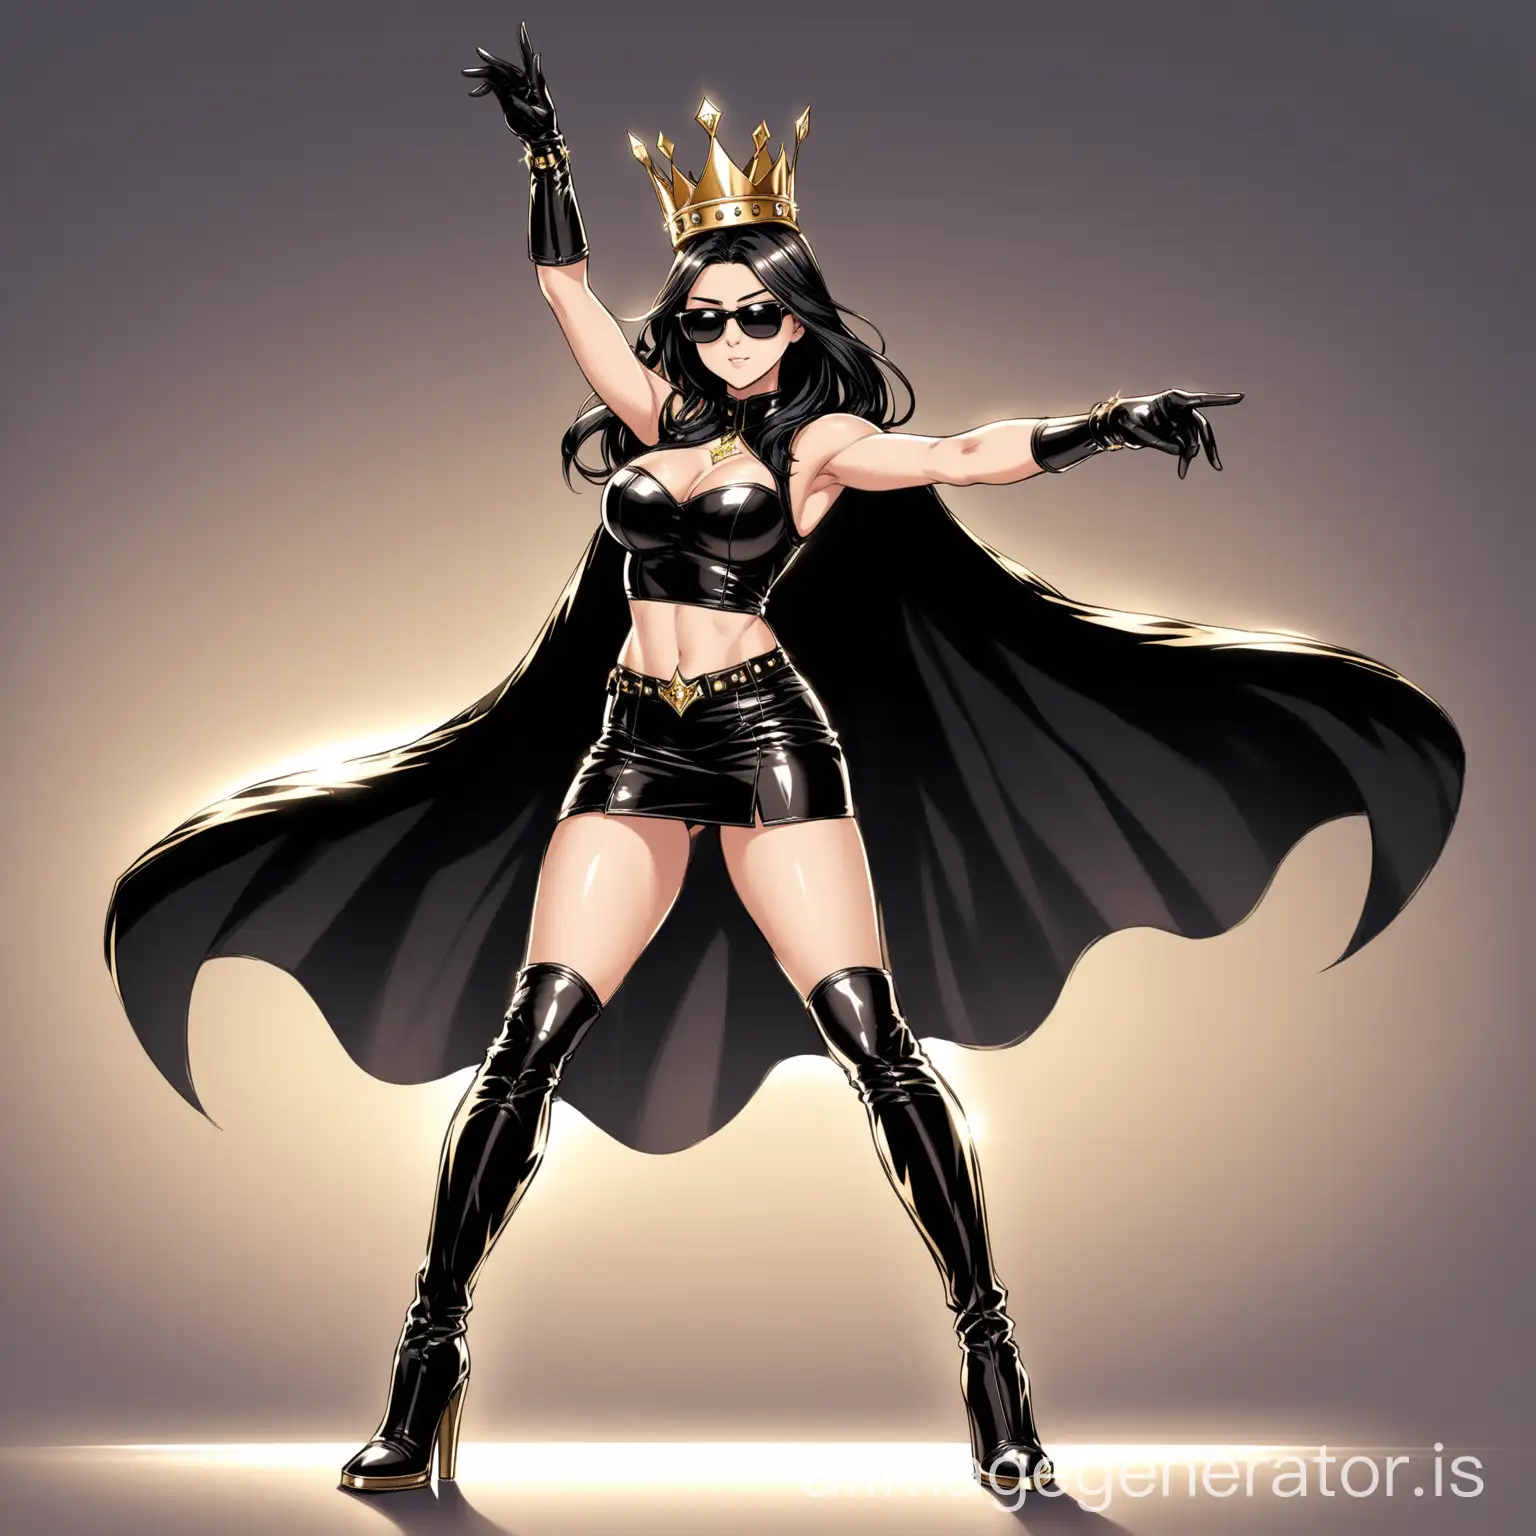 Sultry-Anime-Girl-in-Elegant-Black-Outfit-with-Royal-Crown-and-Superhero-Cape